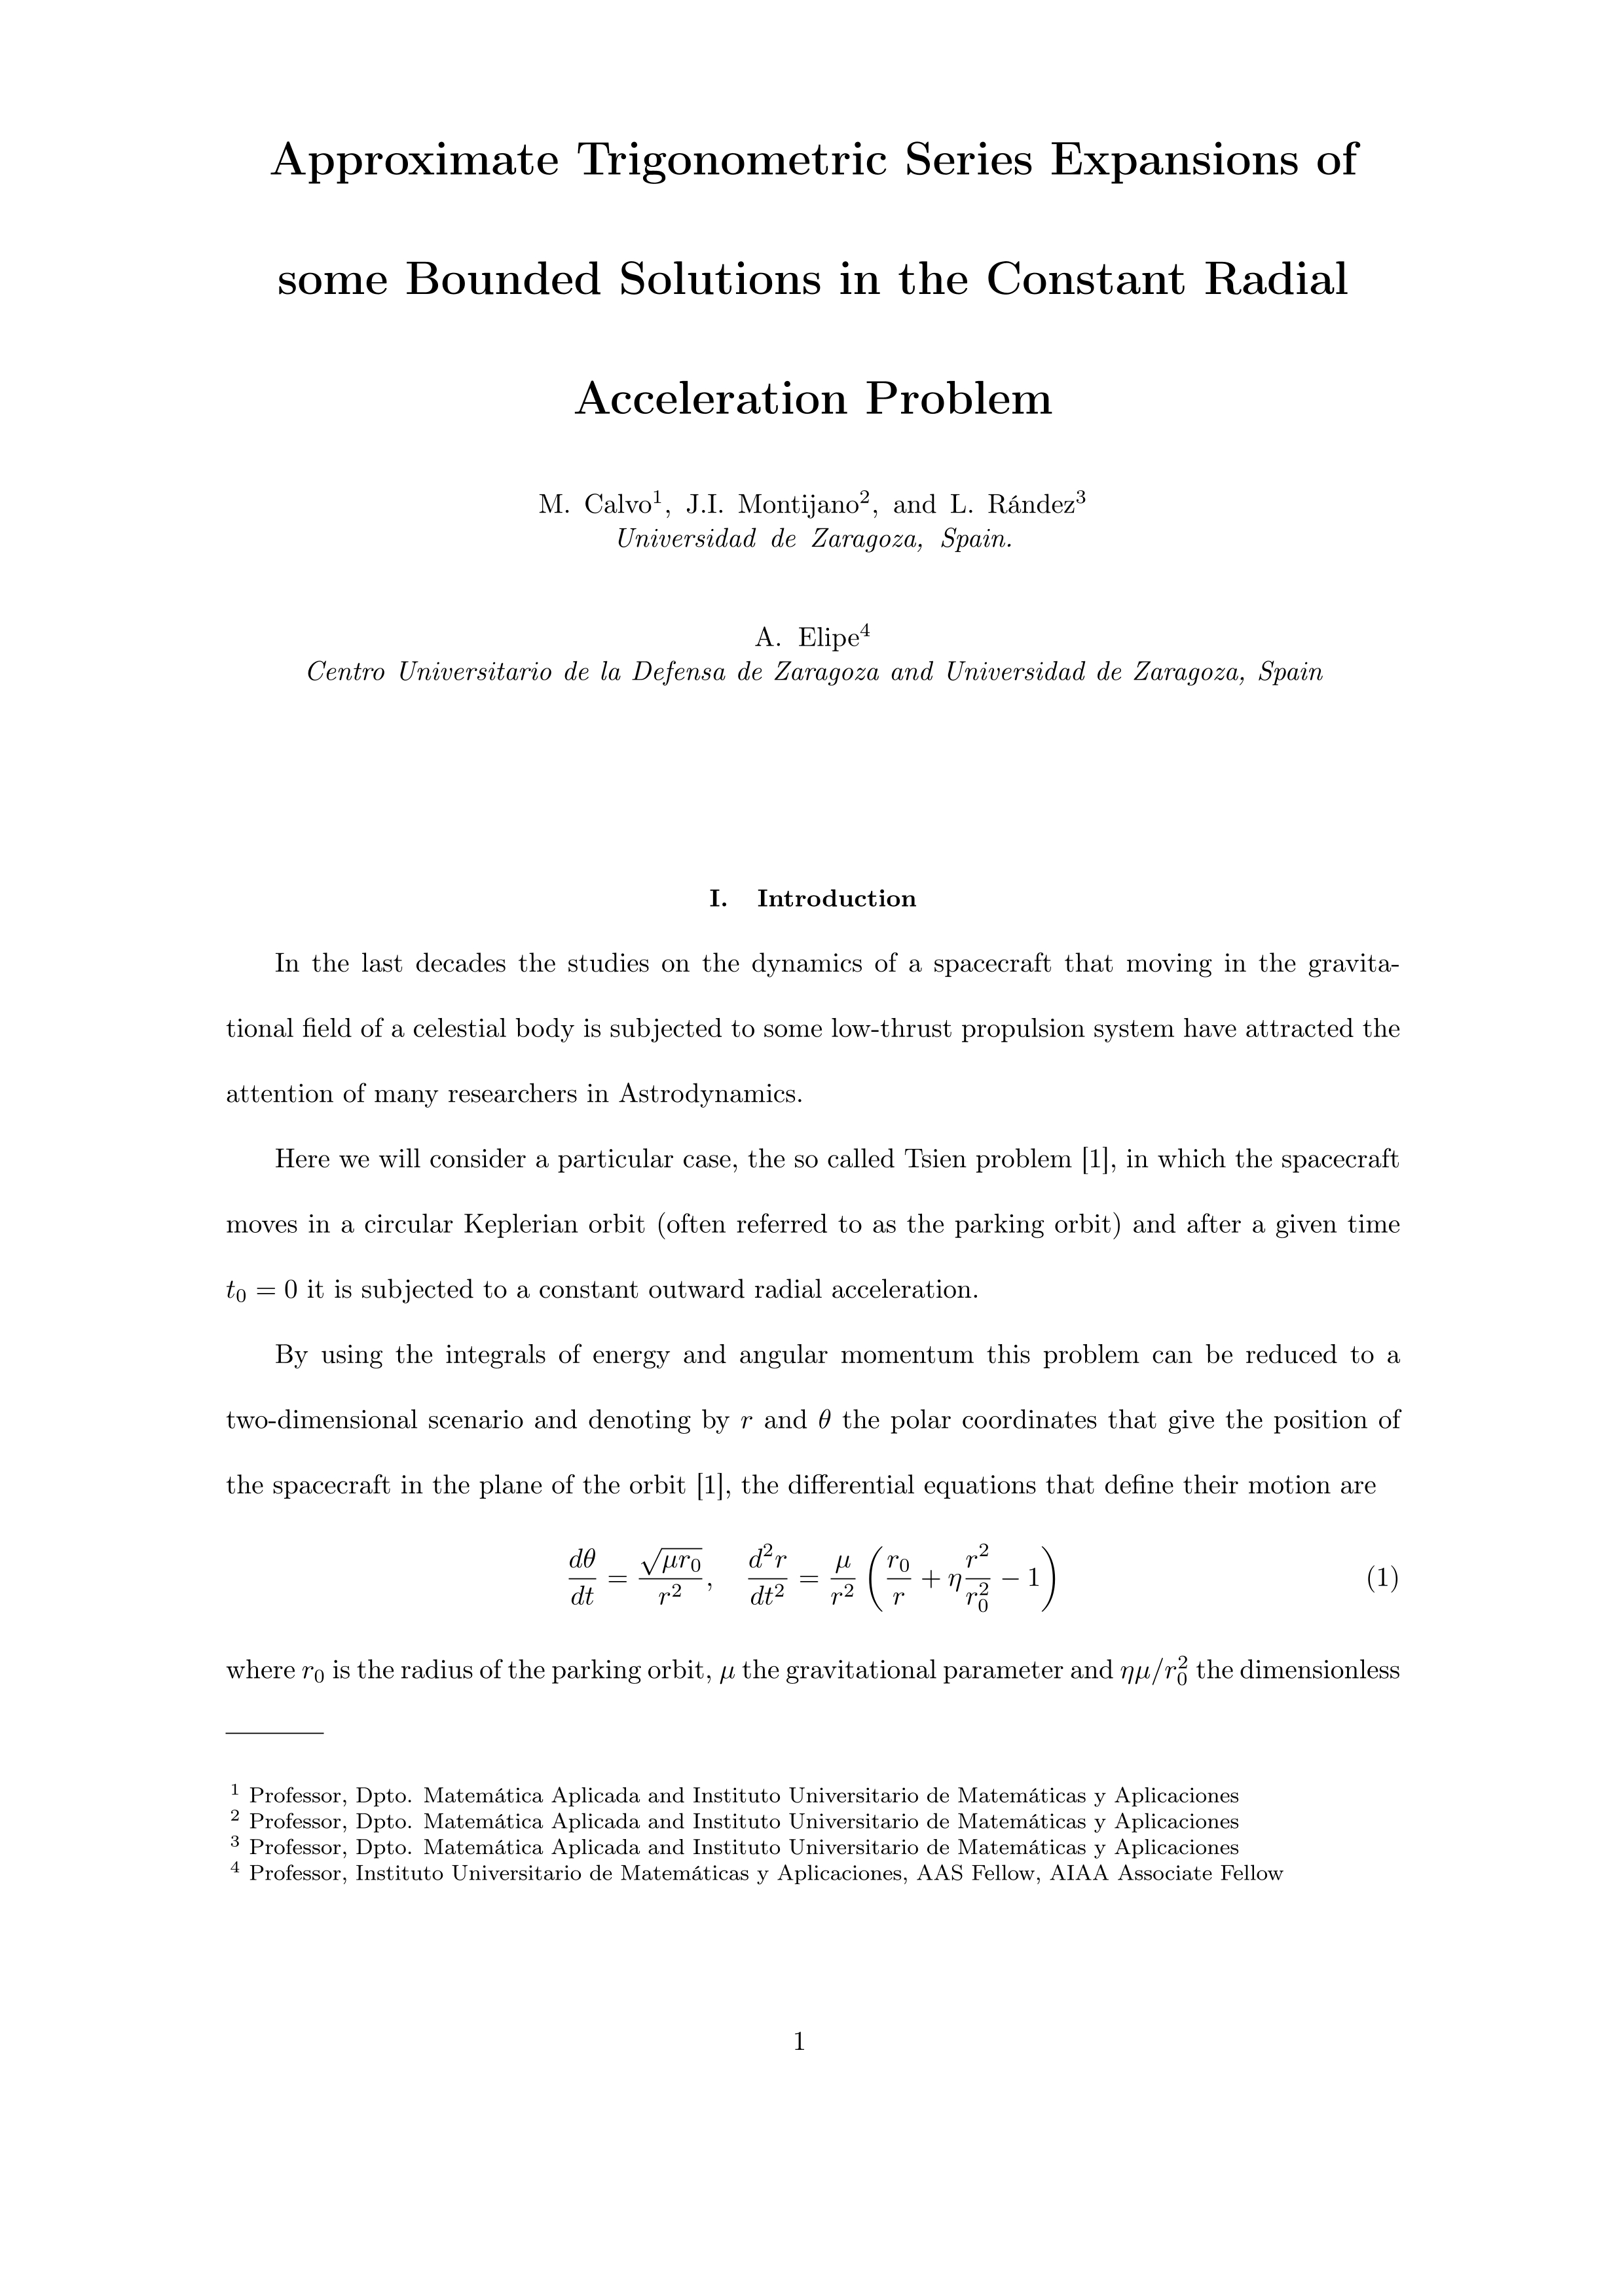 Approximate trigonometric series expansions of some bounded solutions in the Tsien problem